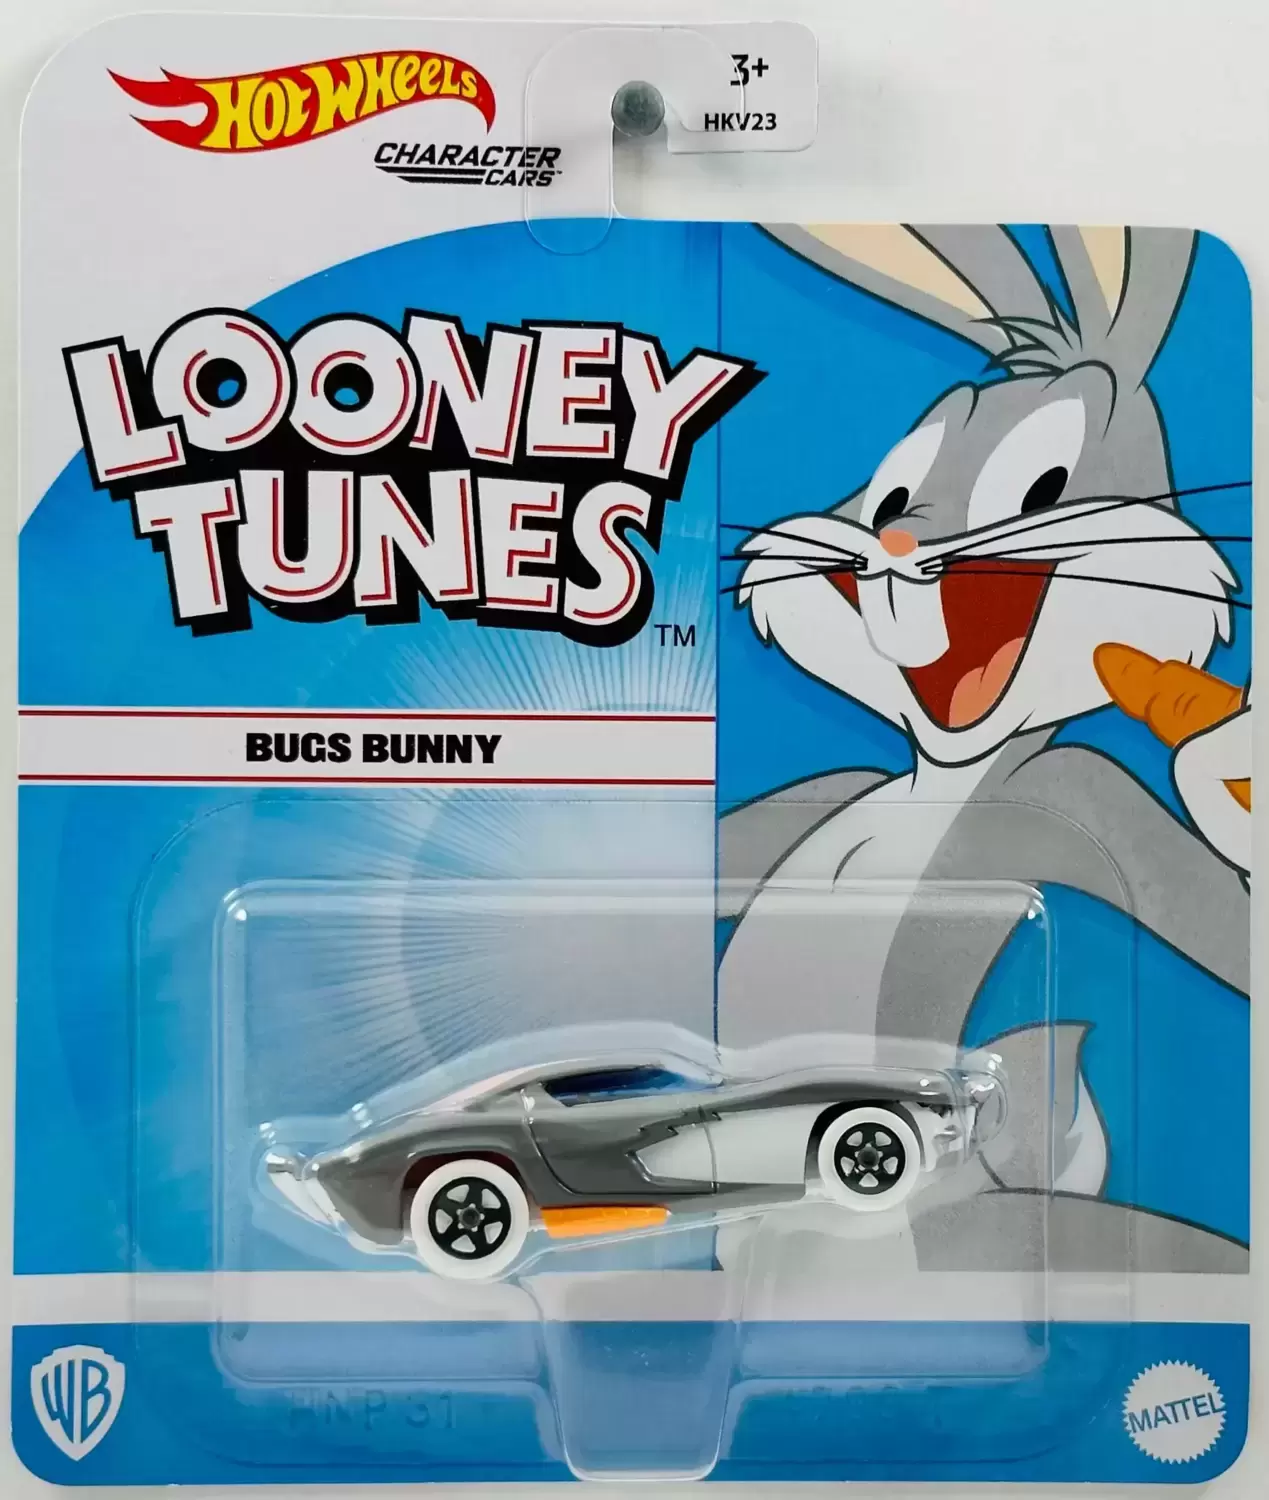 Looney Tunes Character Cars (2023) - HKV23 - Bugs Bunny